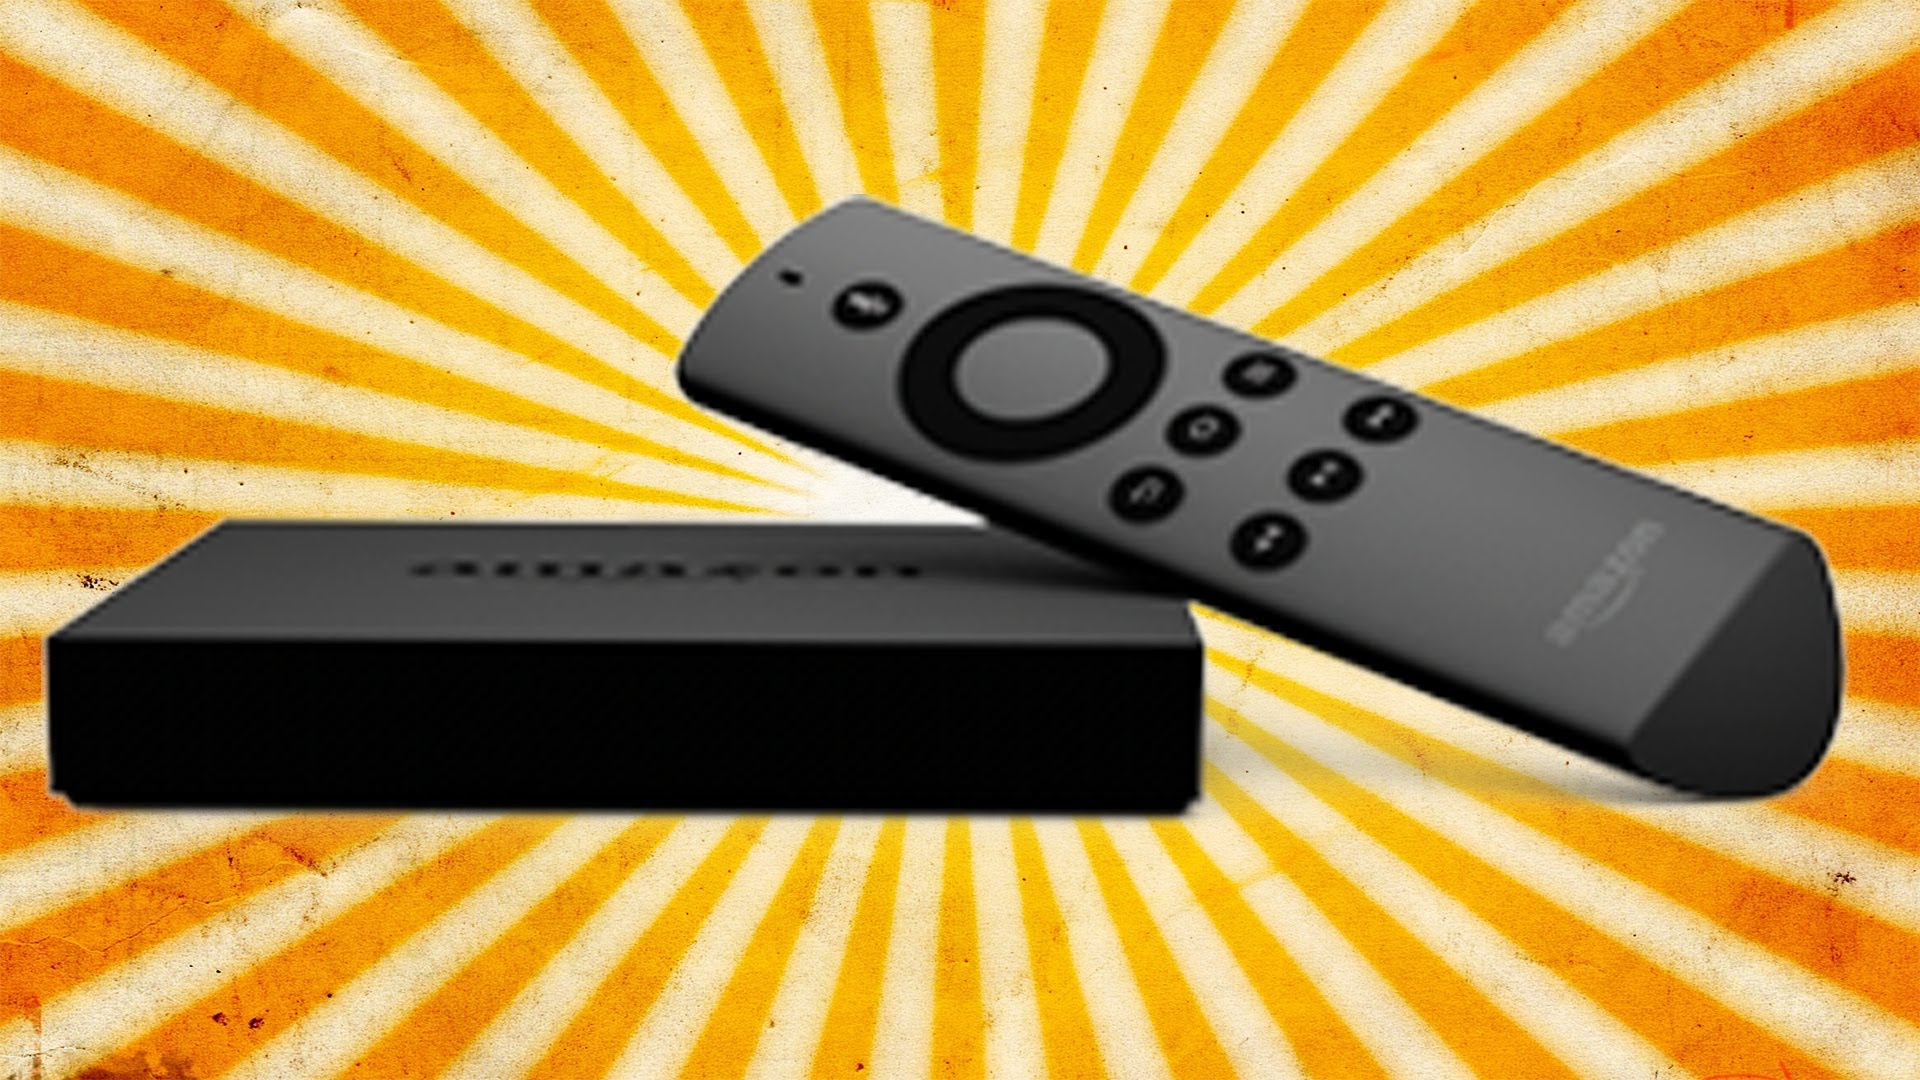 Review: Amazon Fire TV